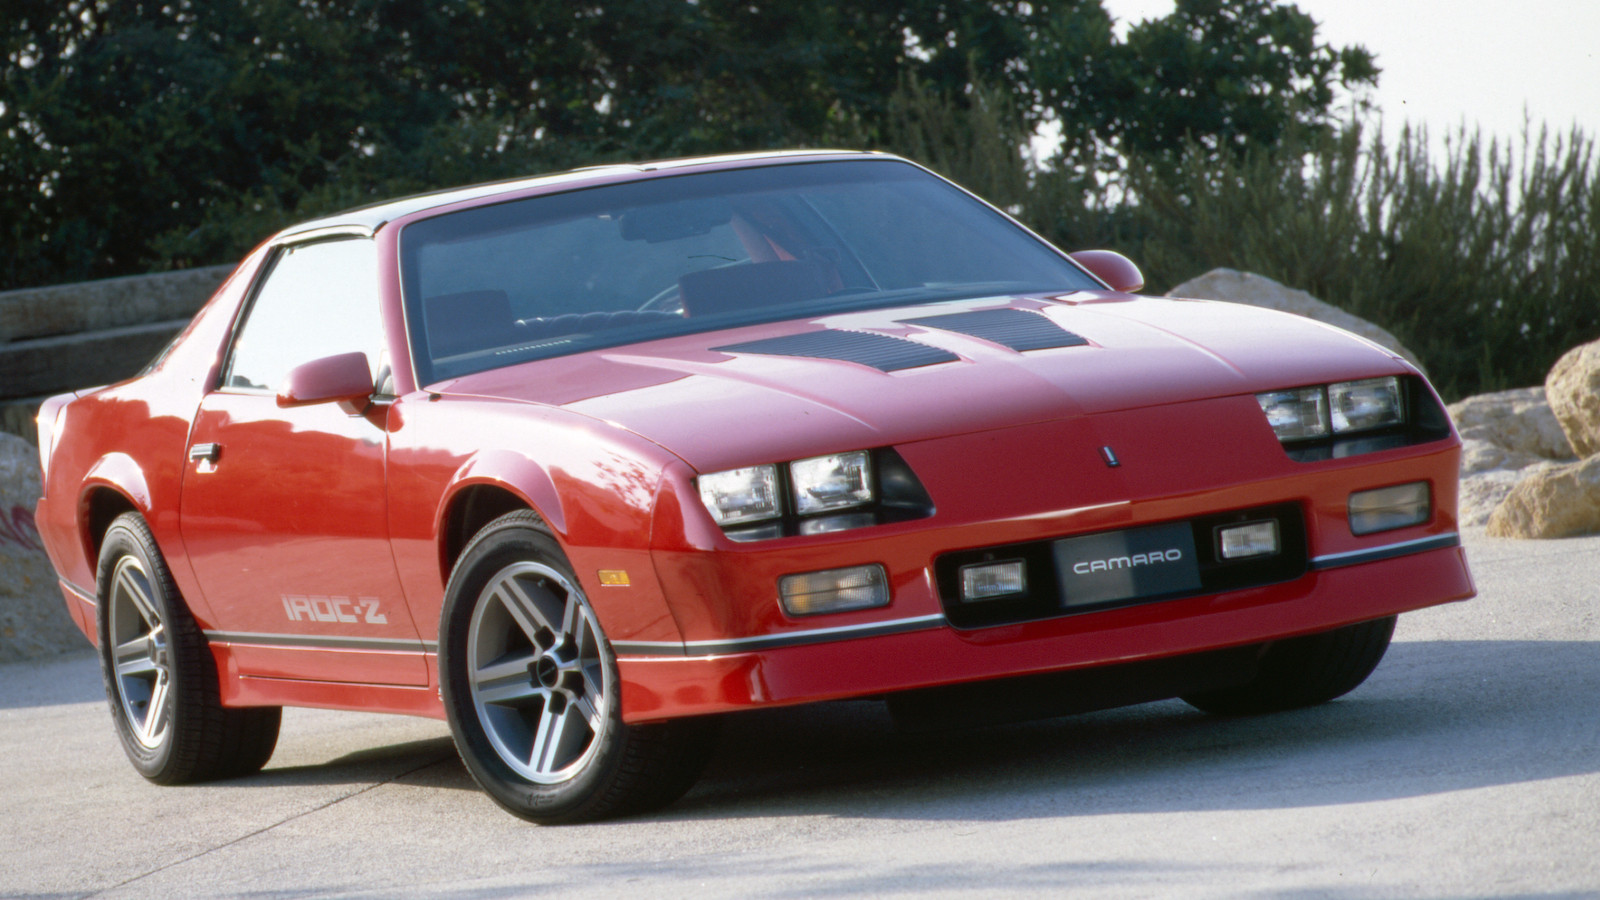 22 of the best ’80s wheels | Classic & Sports Car